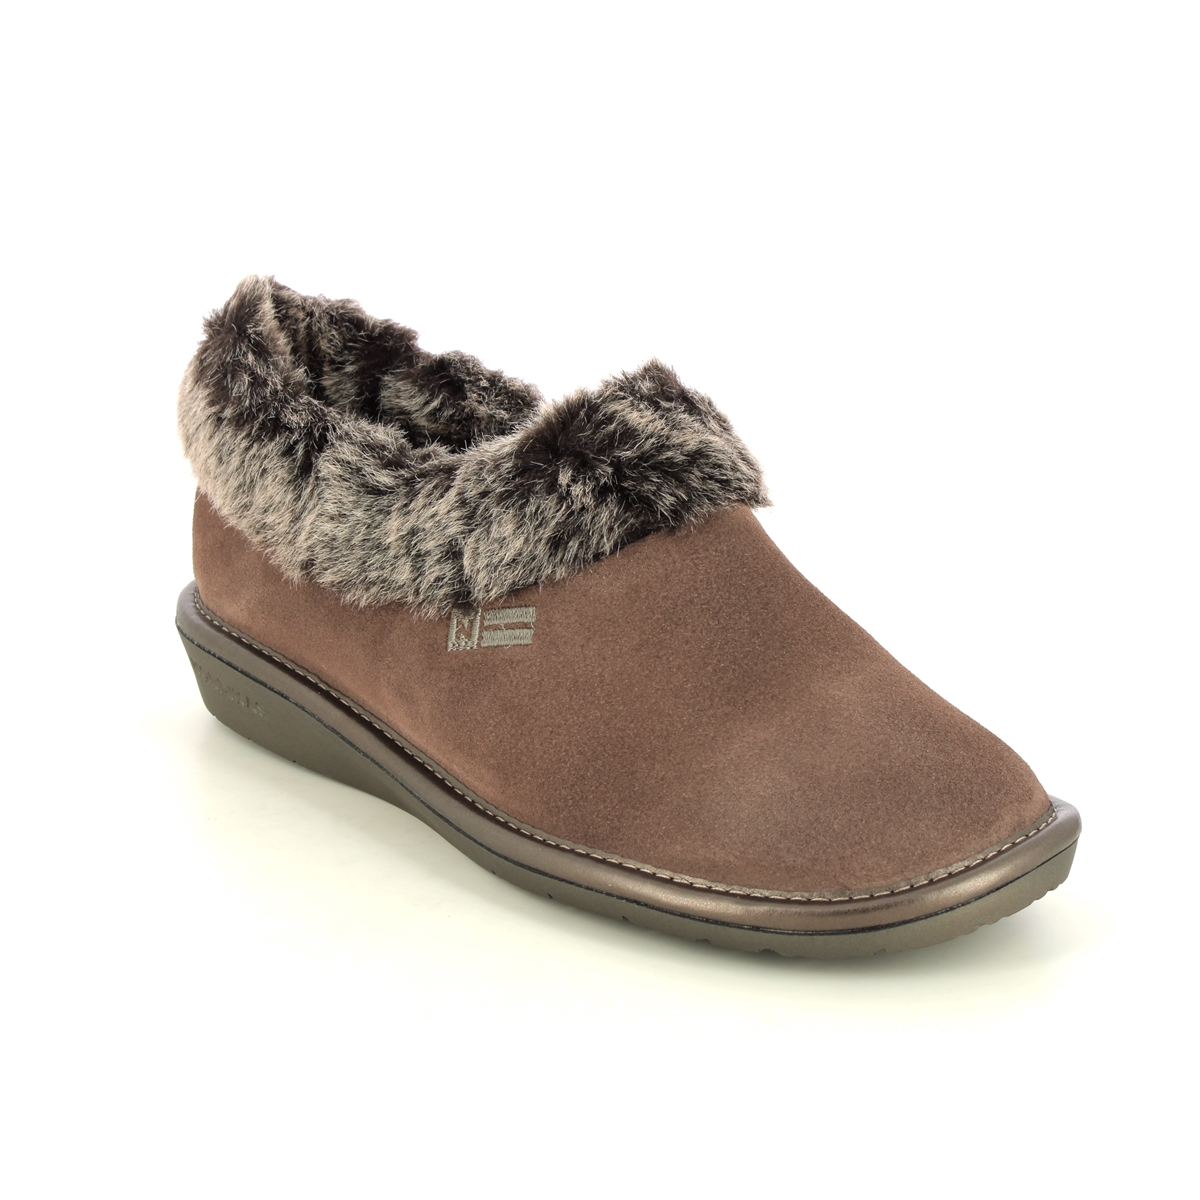 Nordikas Toasty Fur Taupe Suede Womens Slippers 1358-53 In Size 38 In Plain Taupe Suede